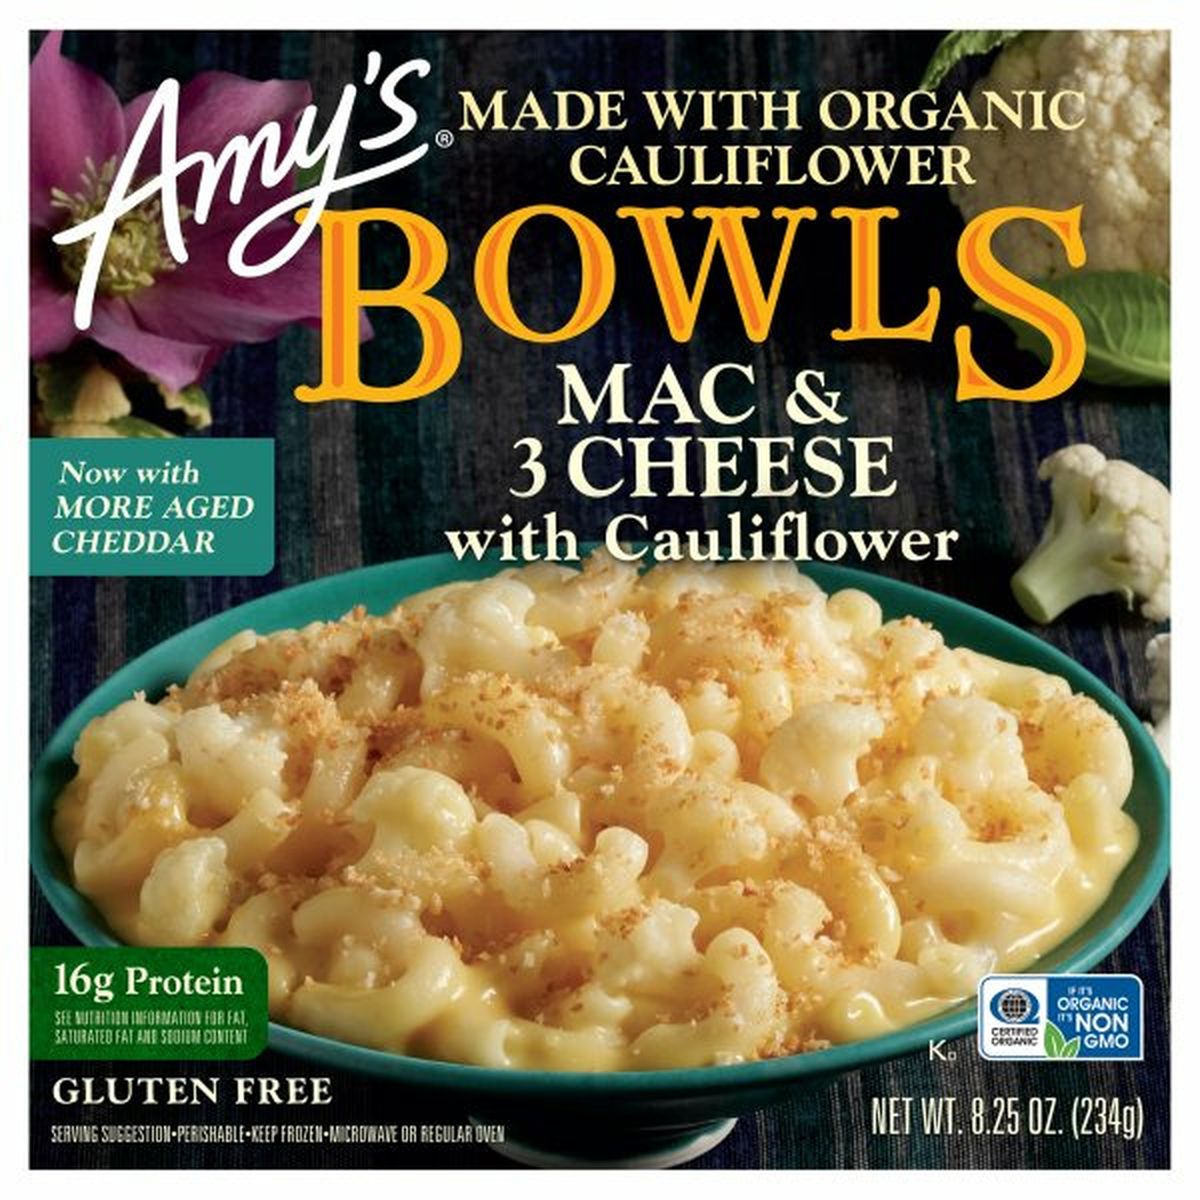 Calories in Amy's Kitchen Bowls Mac & 3 Cheese with Cauliflower